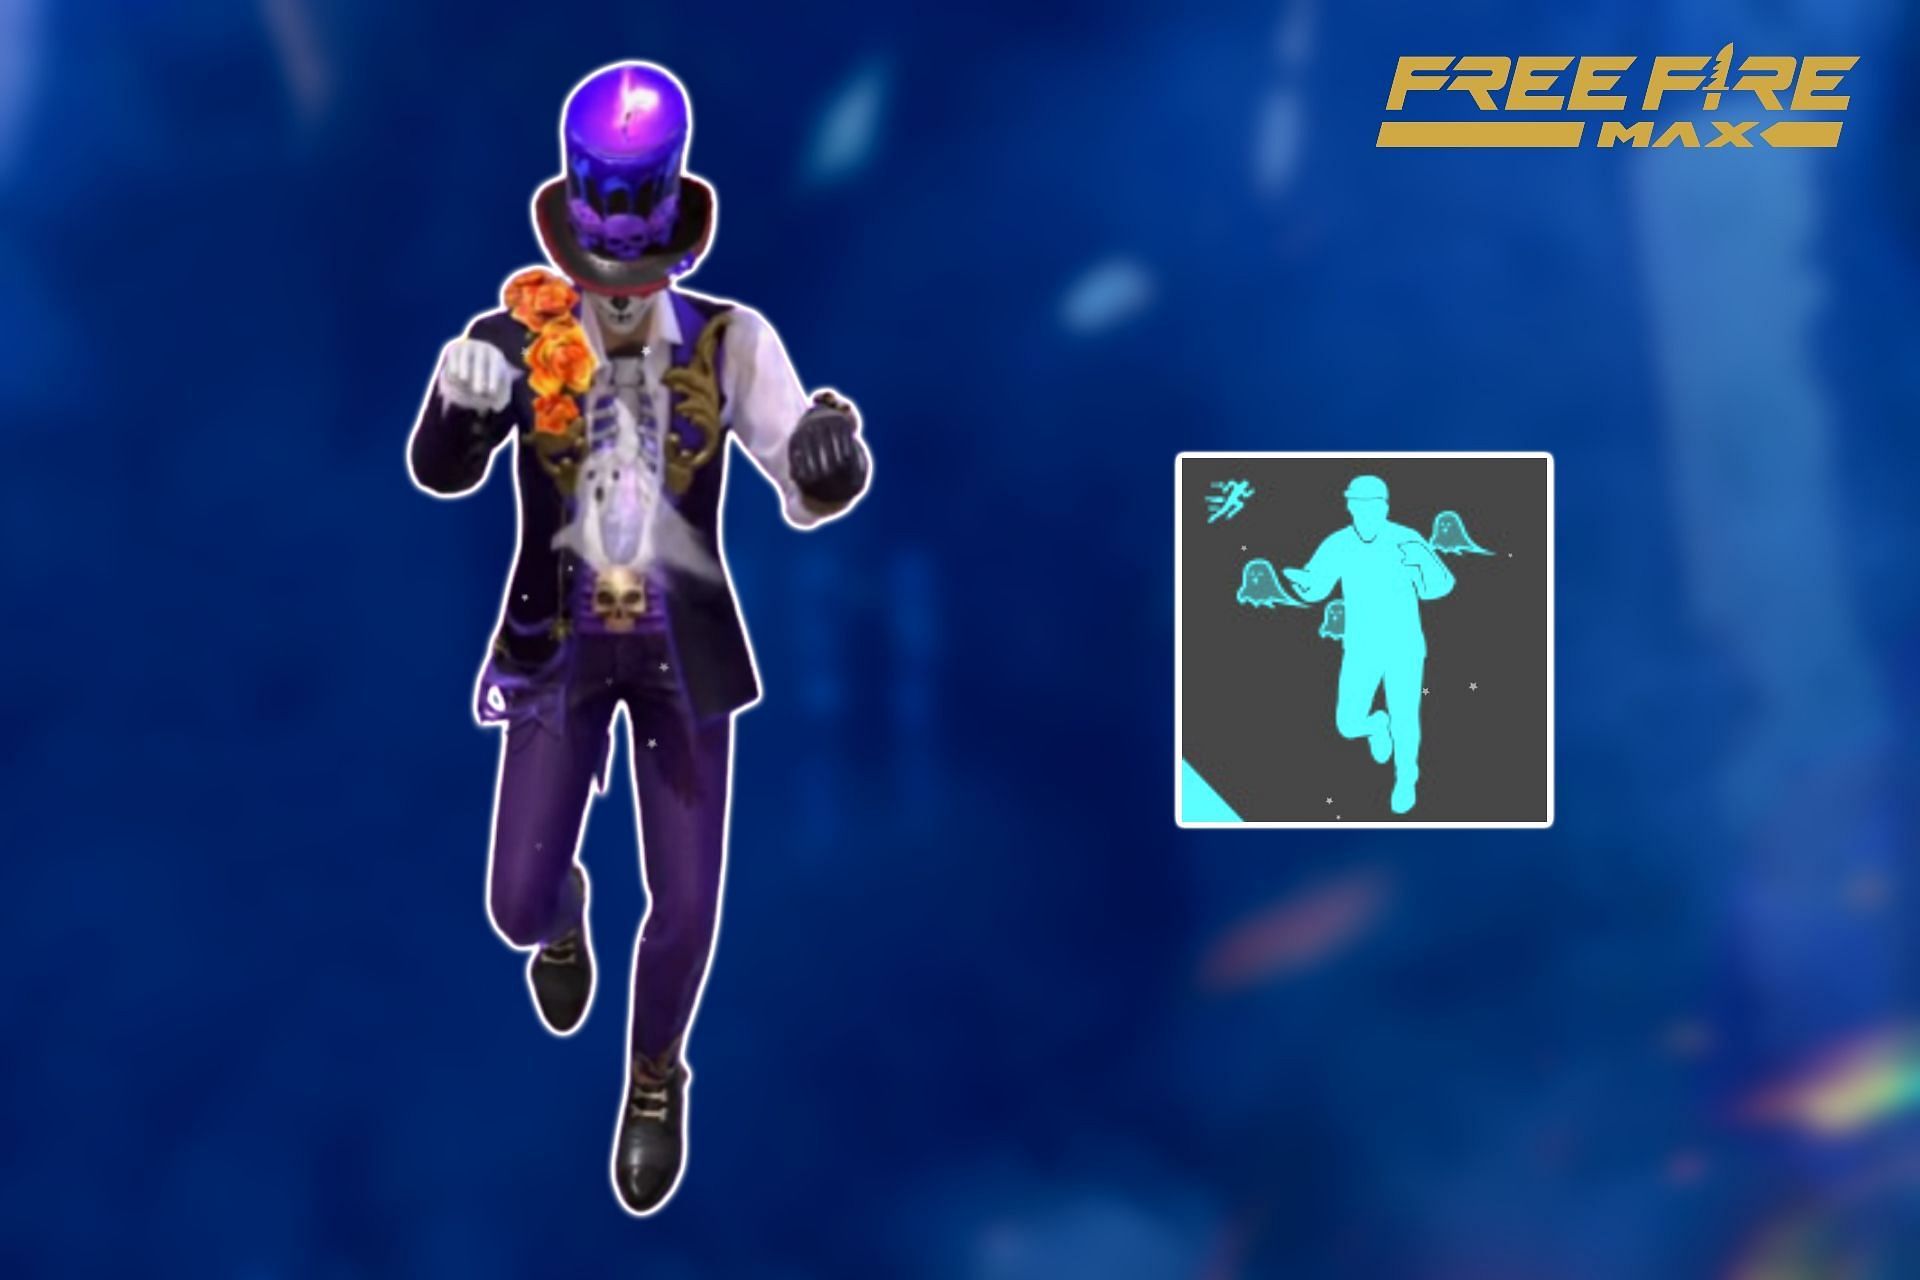 The Emote Party event will be lasting for one week in Free Fire MAX (Image via Sportskeeda)